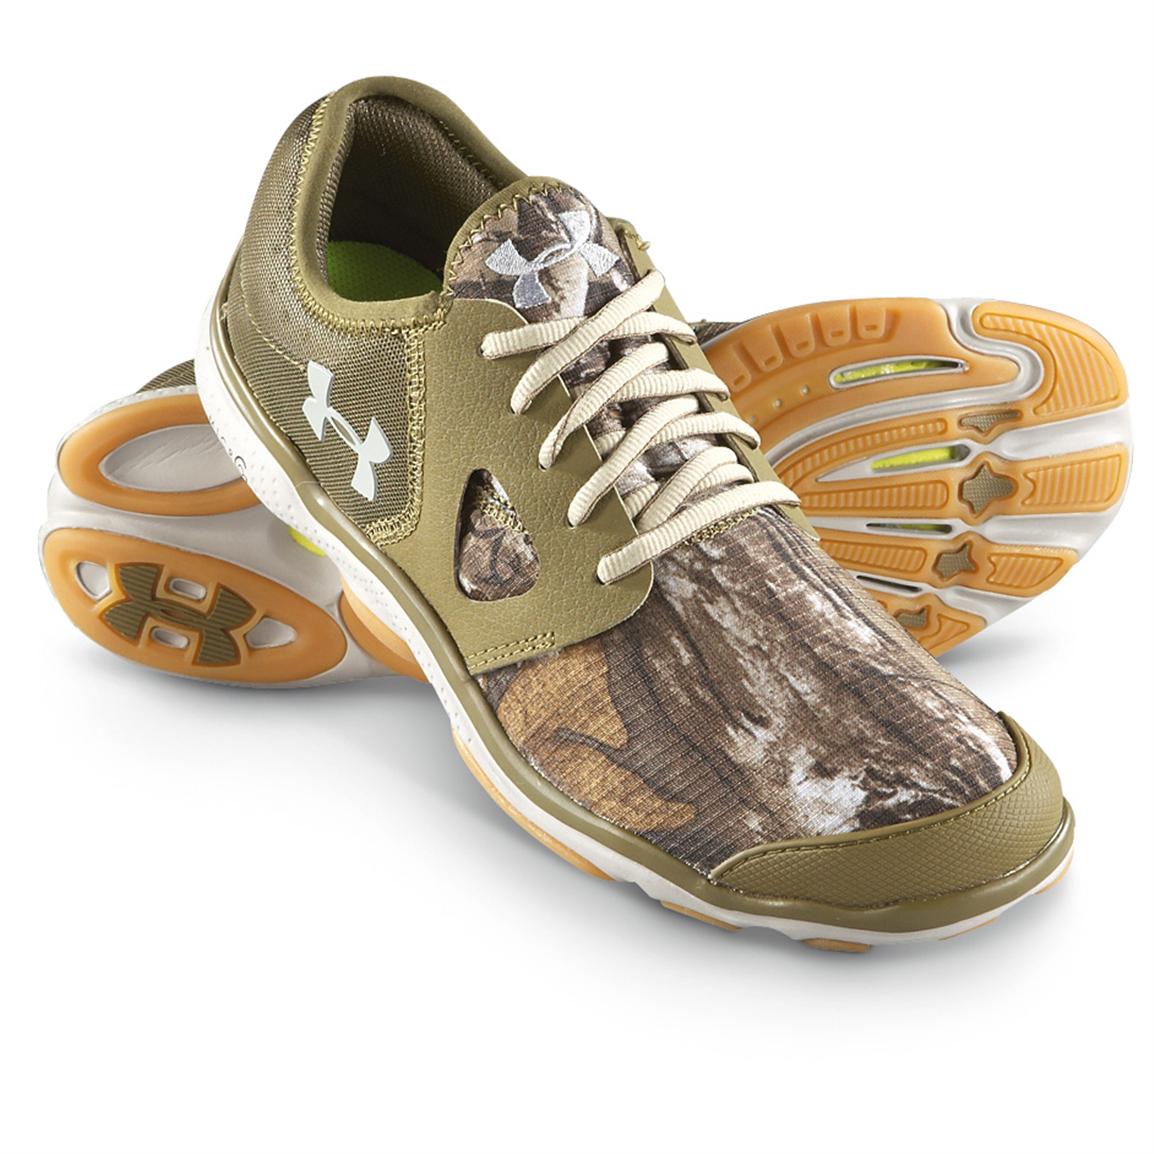 Men's Under Armour Toxic Outdoor Shoes, Realtree AP Xtra